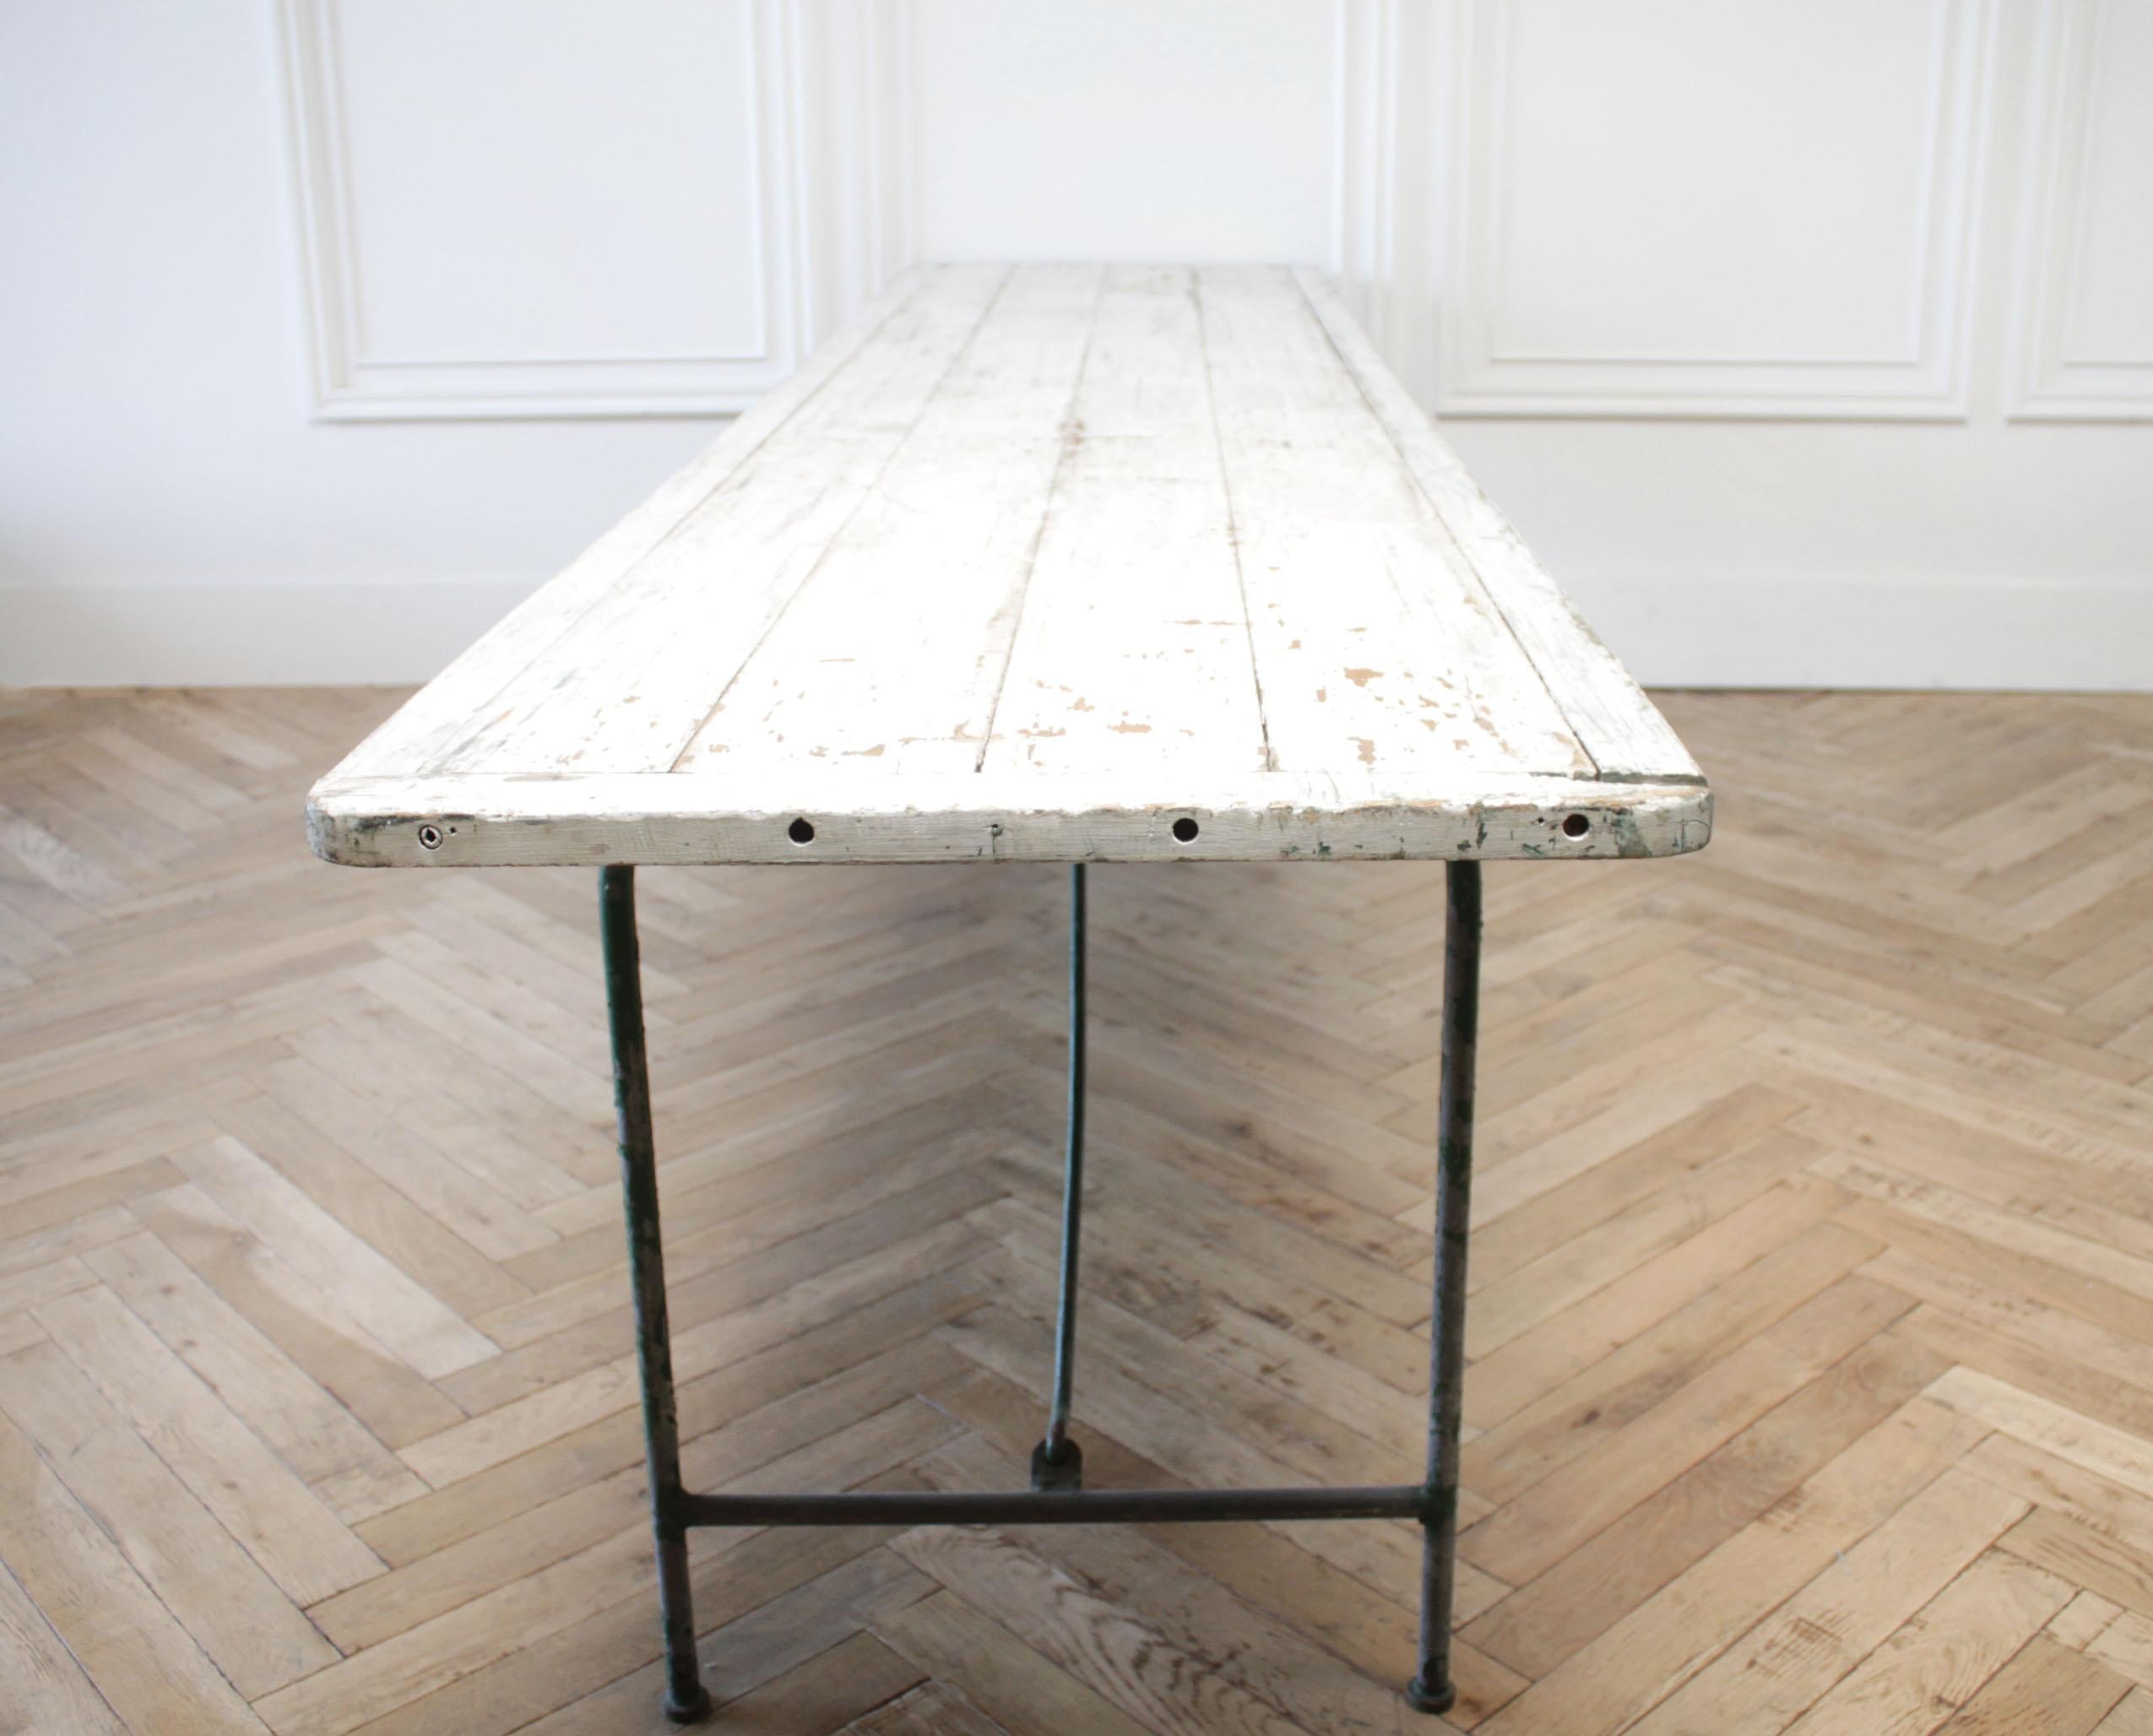 Antique European painted wood folding dining or serving table
White chipping paint exposing a green paint and wood surface.
This table has metal folding legs, that collapse under for easy storage.
Size: 120